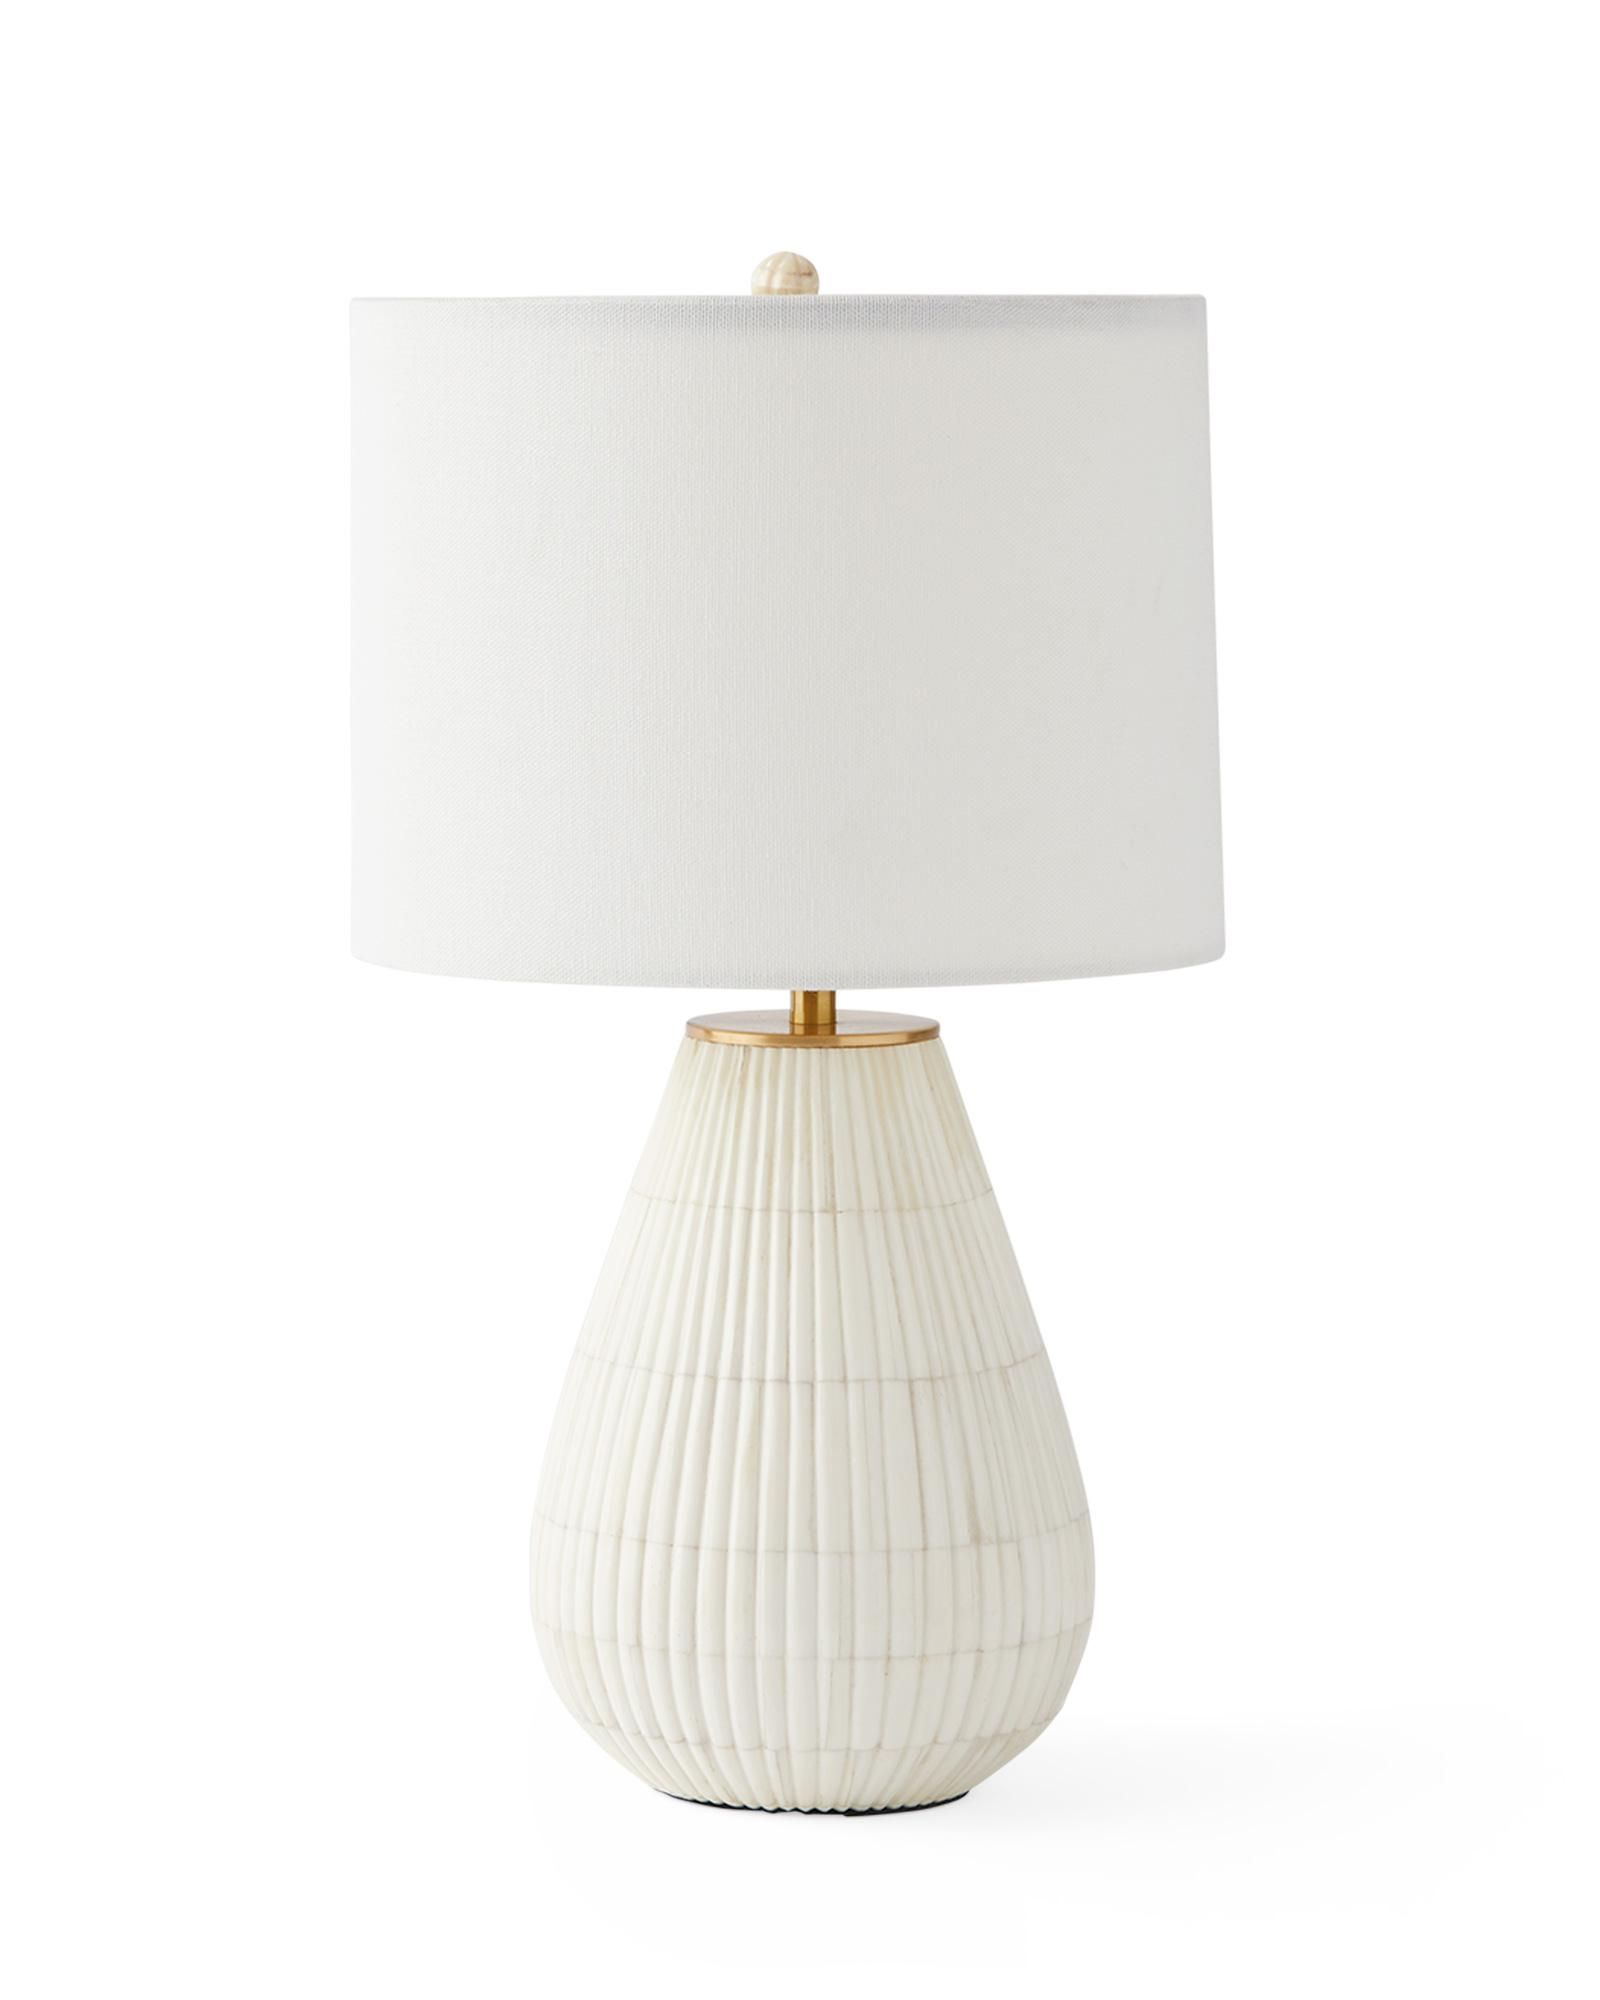 Irving Bone Inlay Petite Table Lamp | Serena and Lily